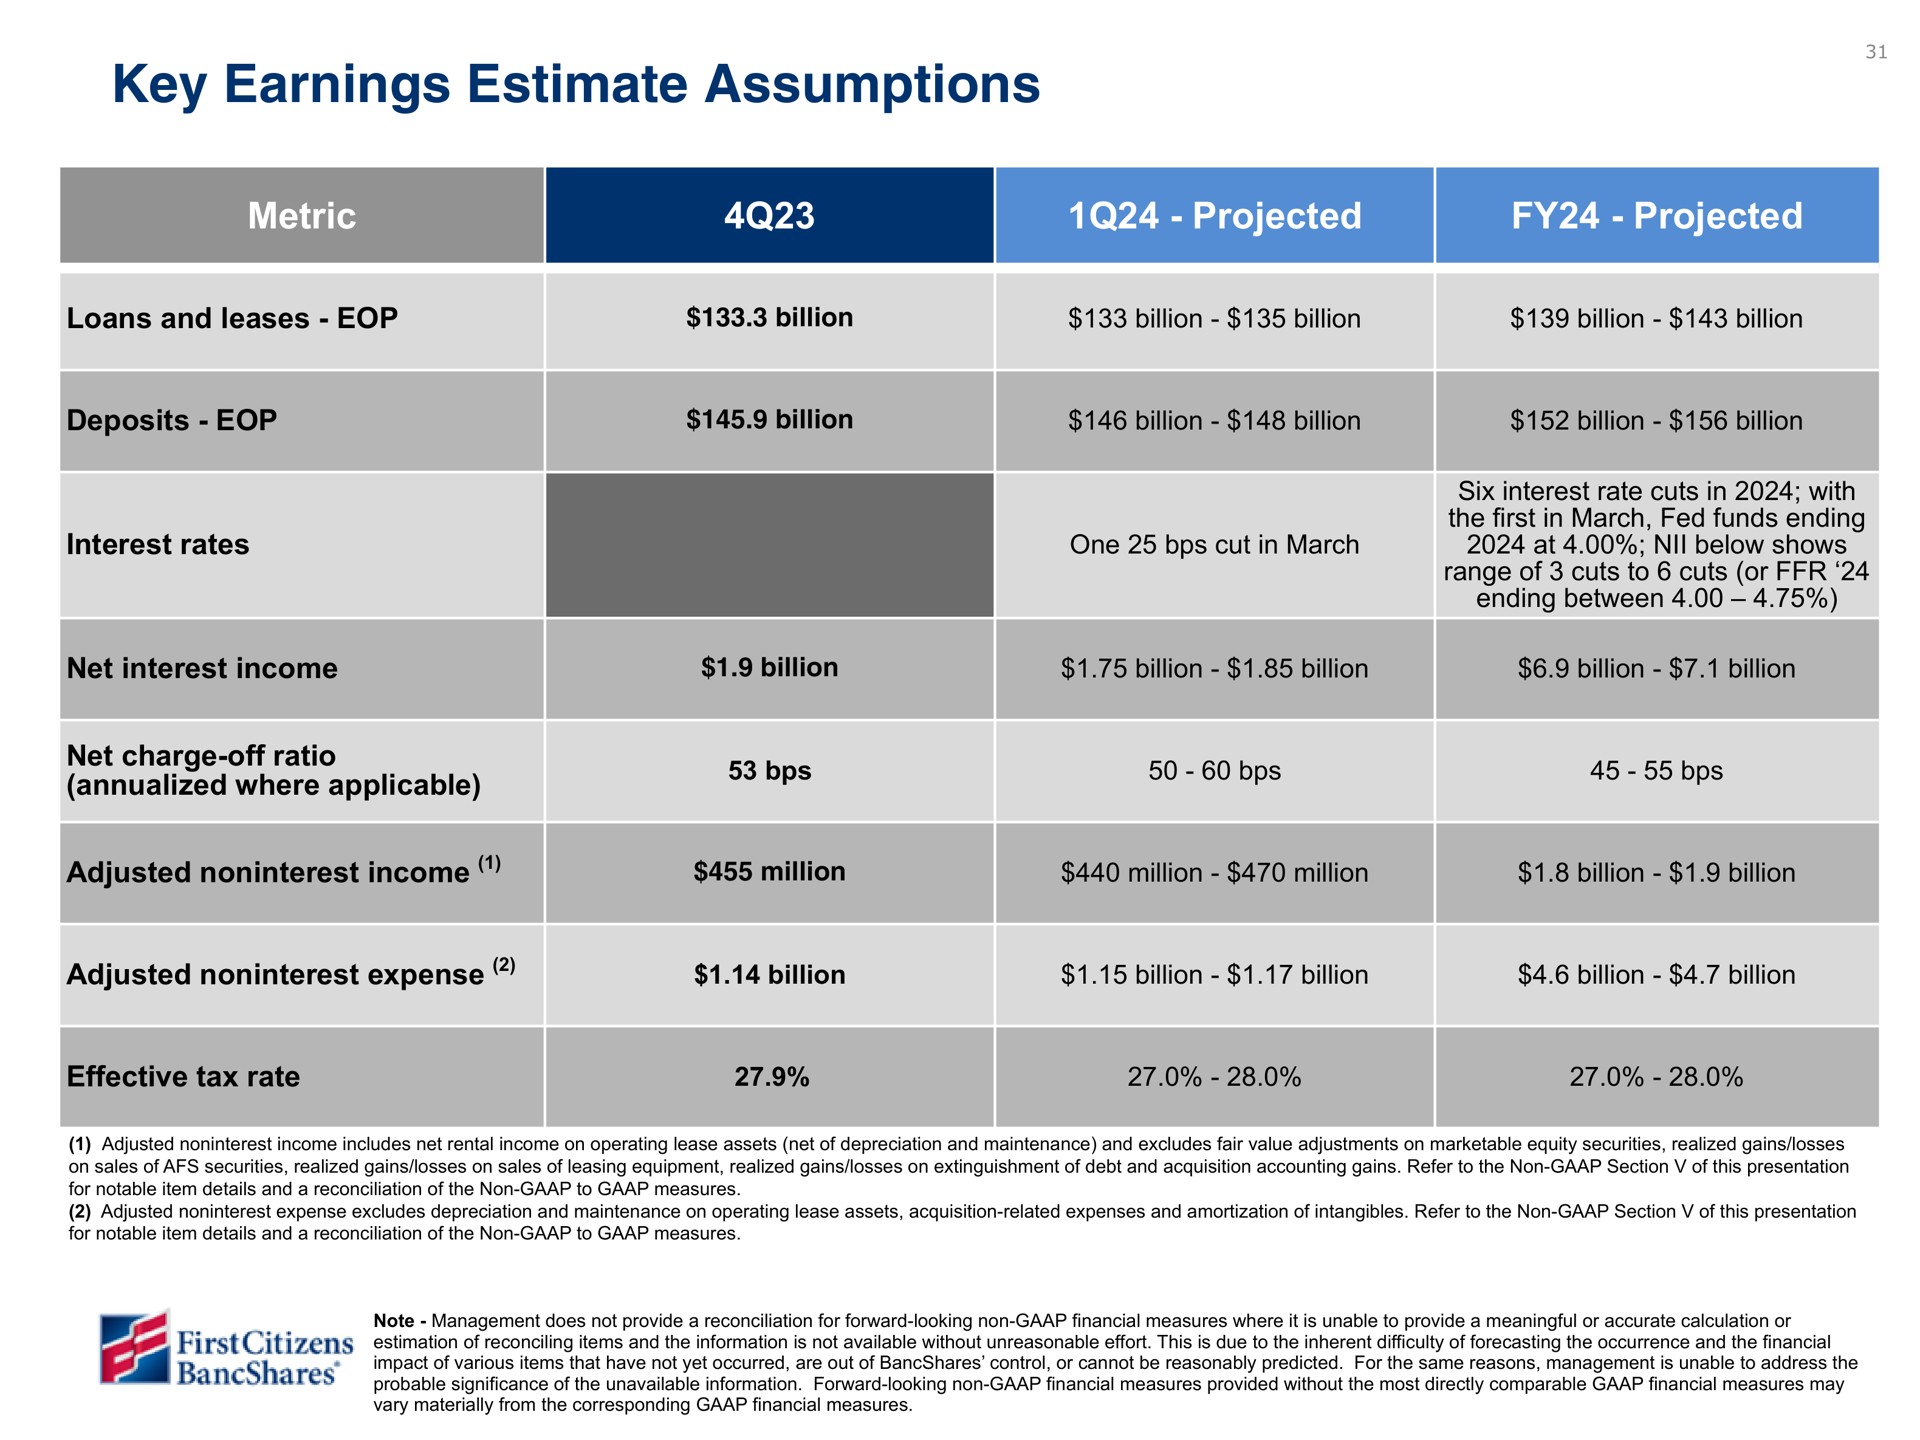 key earnings estimate assumptions metric projected projected where applicable adjusted income million million million billion billion adjusted expense billion billion billion billion billion | First Citizens BancShares